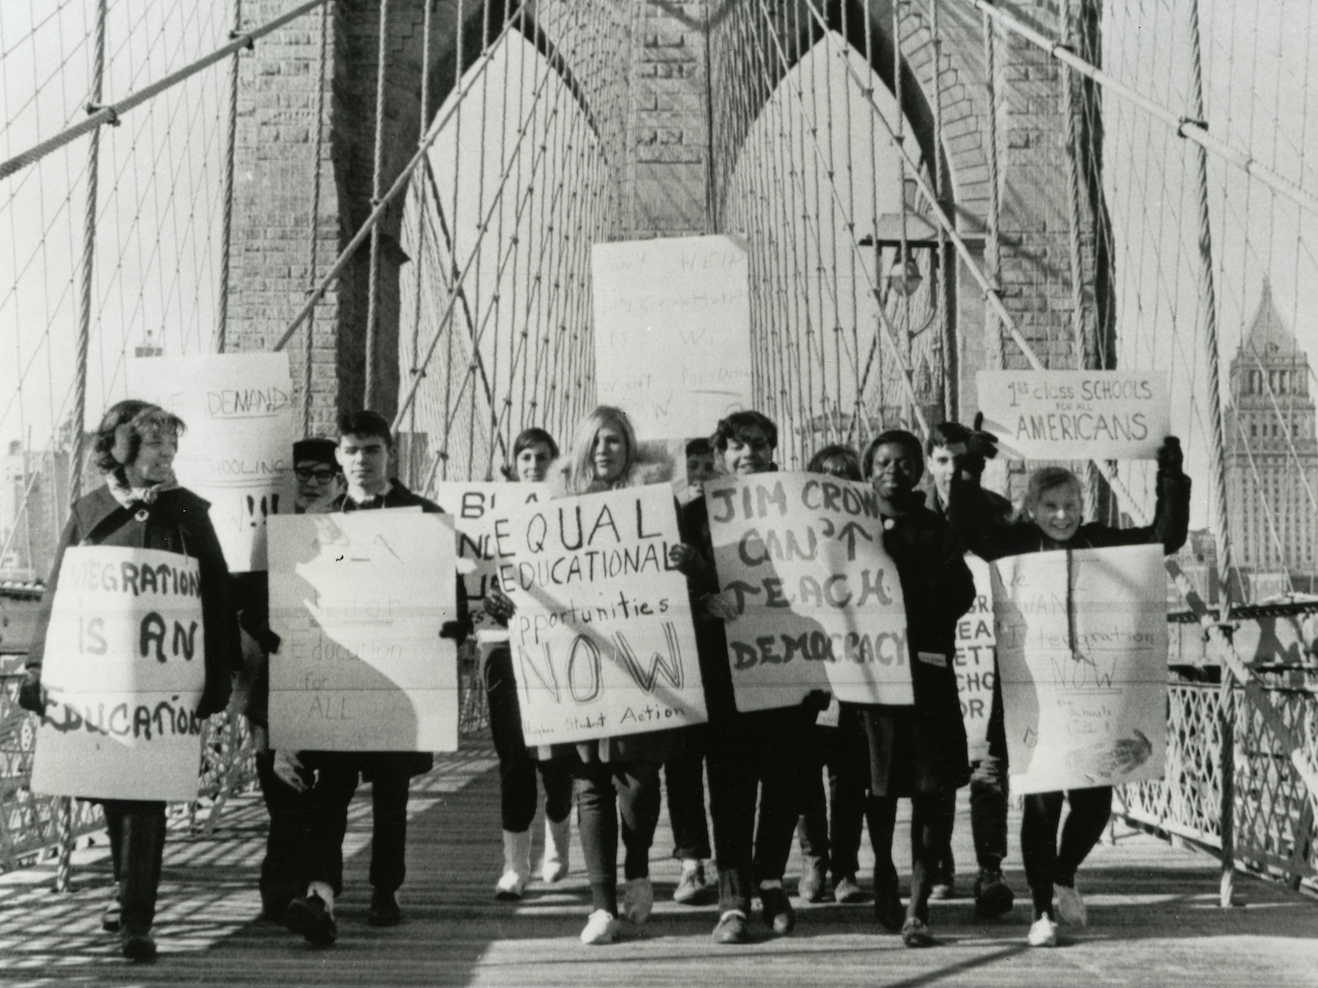 Black and white photo of students protesting segregation in schools as they cross the Brooklyn Bridge in 1964. Holding signs that read "Equal Education Opportunities Now" and "Jim Crow Can't Teach Democracy." 